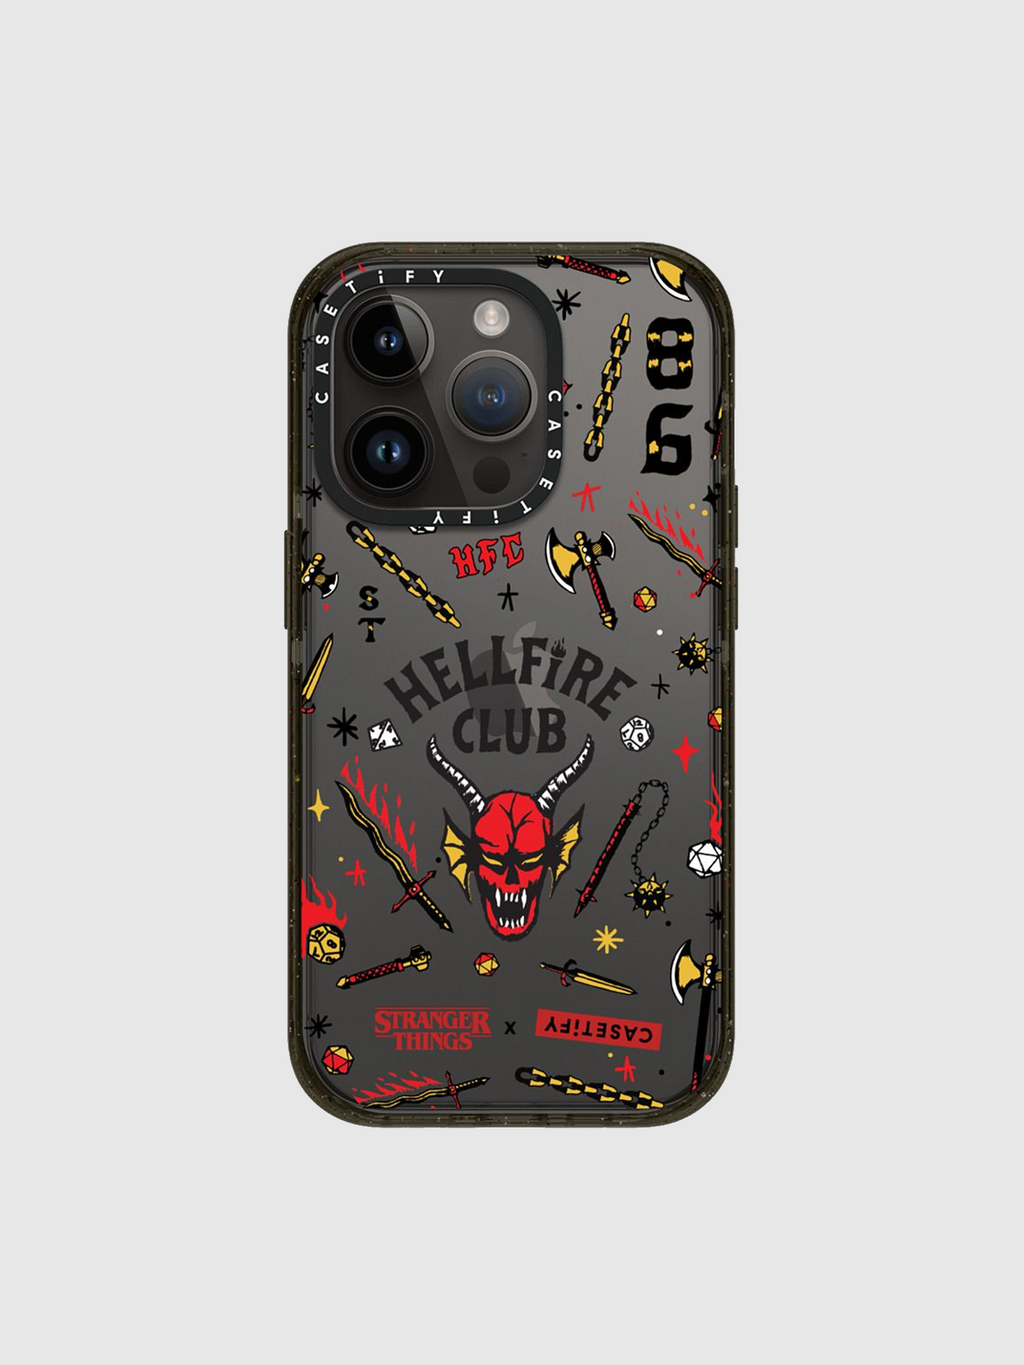 Hellfire Club Members Only iPhone Case (RECASETiFY Impact Case ...